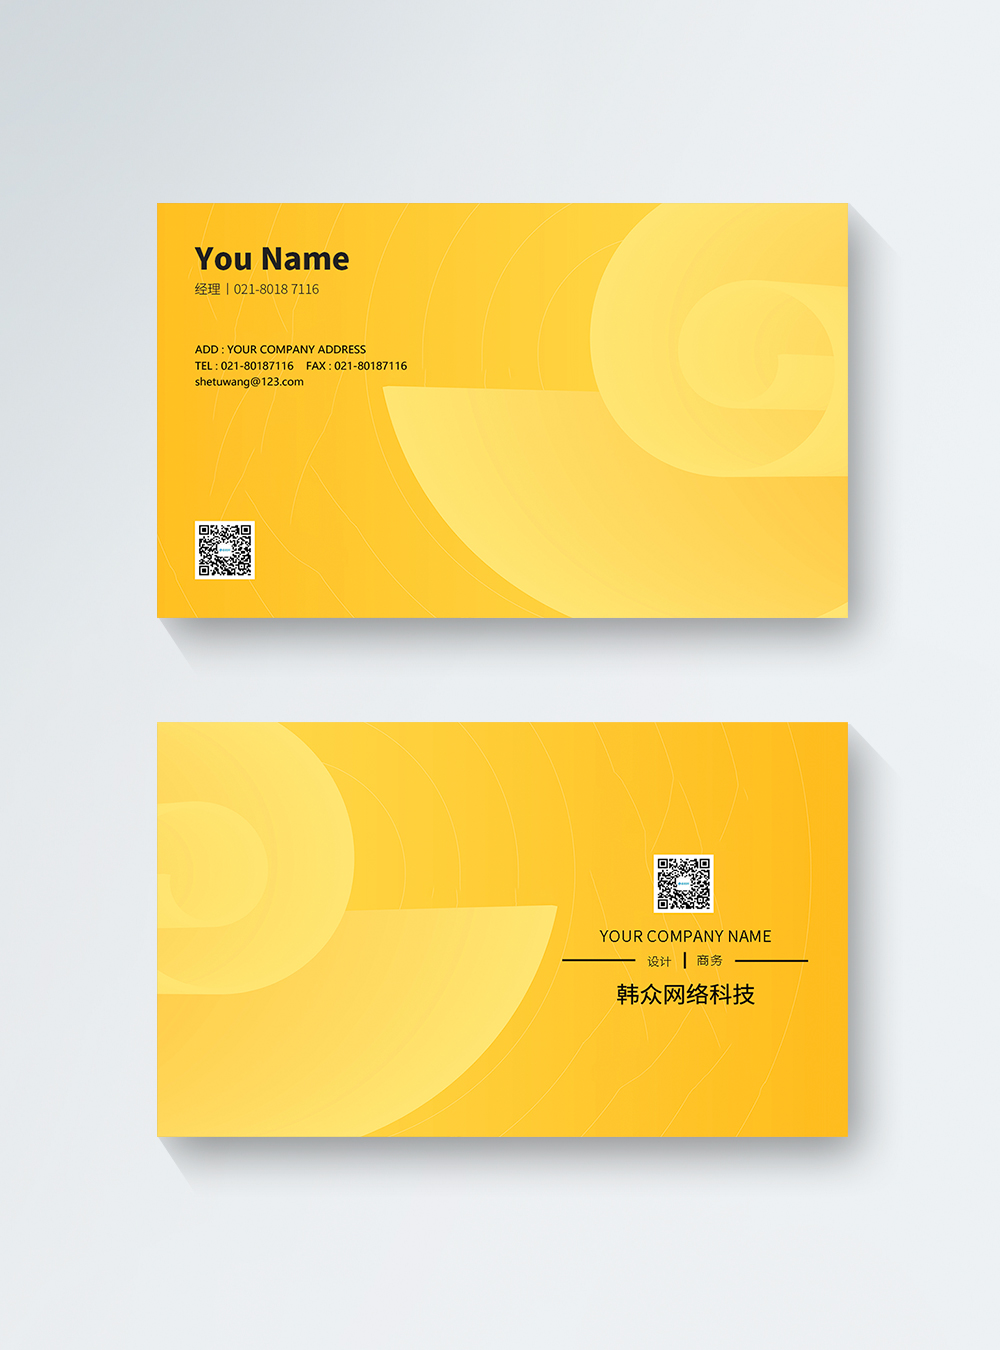 Download Yellow Minimalistic Business Card Design Template Template Image Picture Free Download 401395328 Lovepik Com PSD Mockup Templates